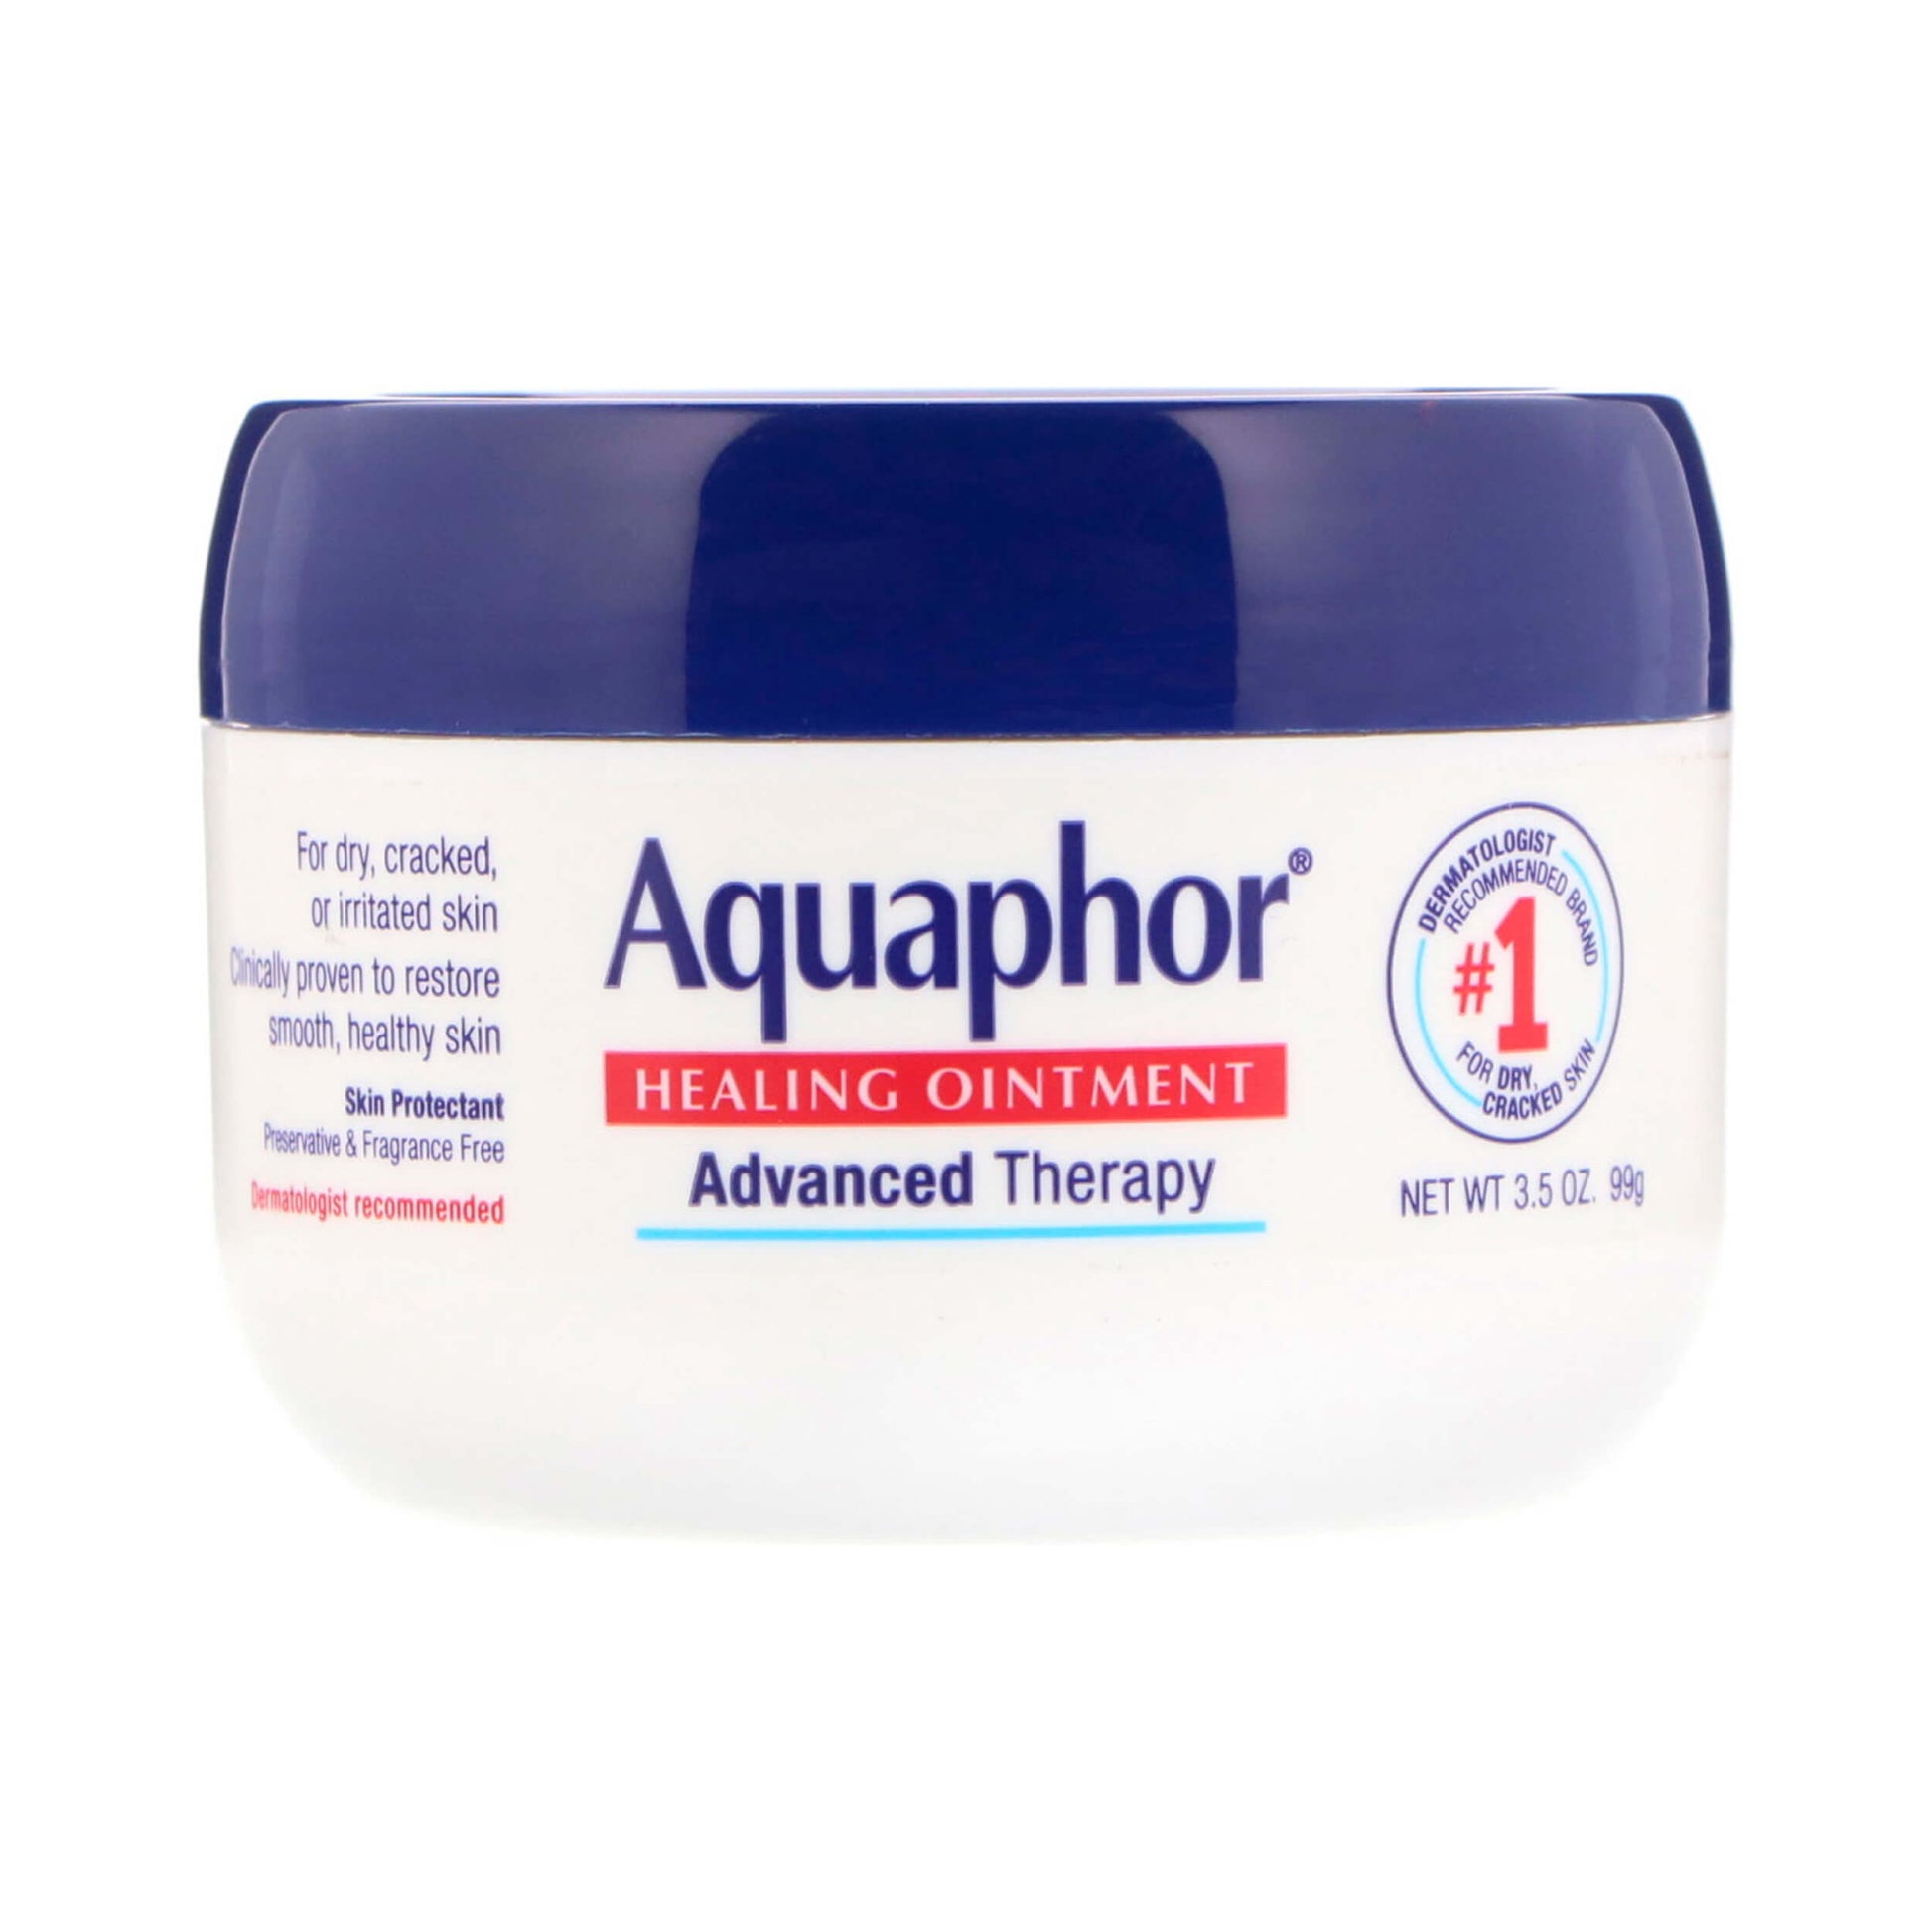 Aquaphor Advanced Therapy Healing Ointment Skin Protectant 99g